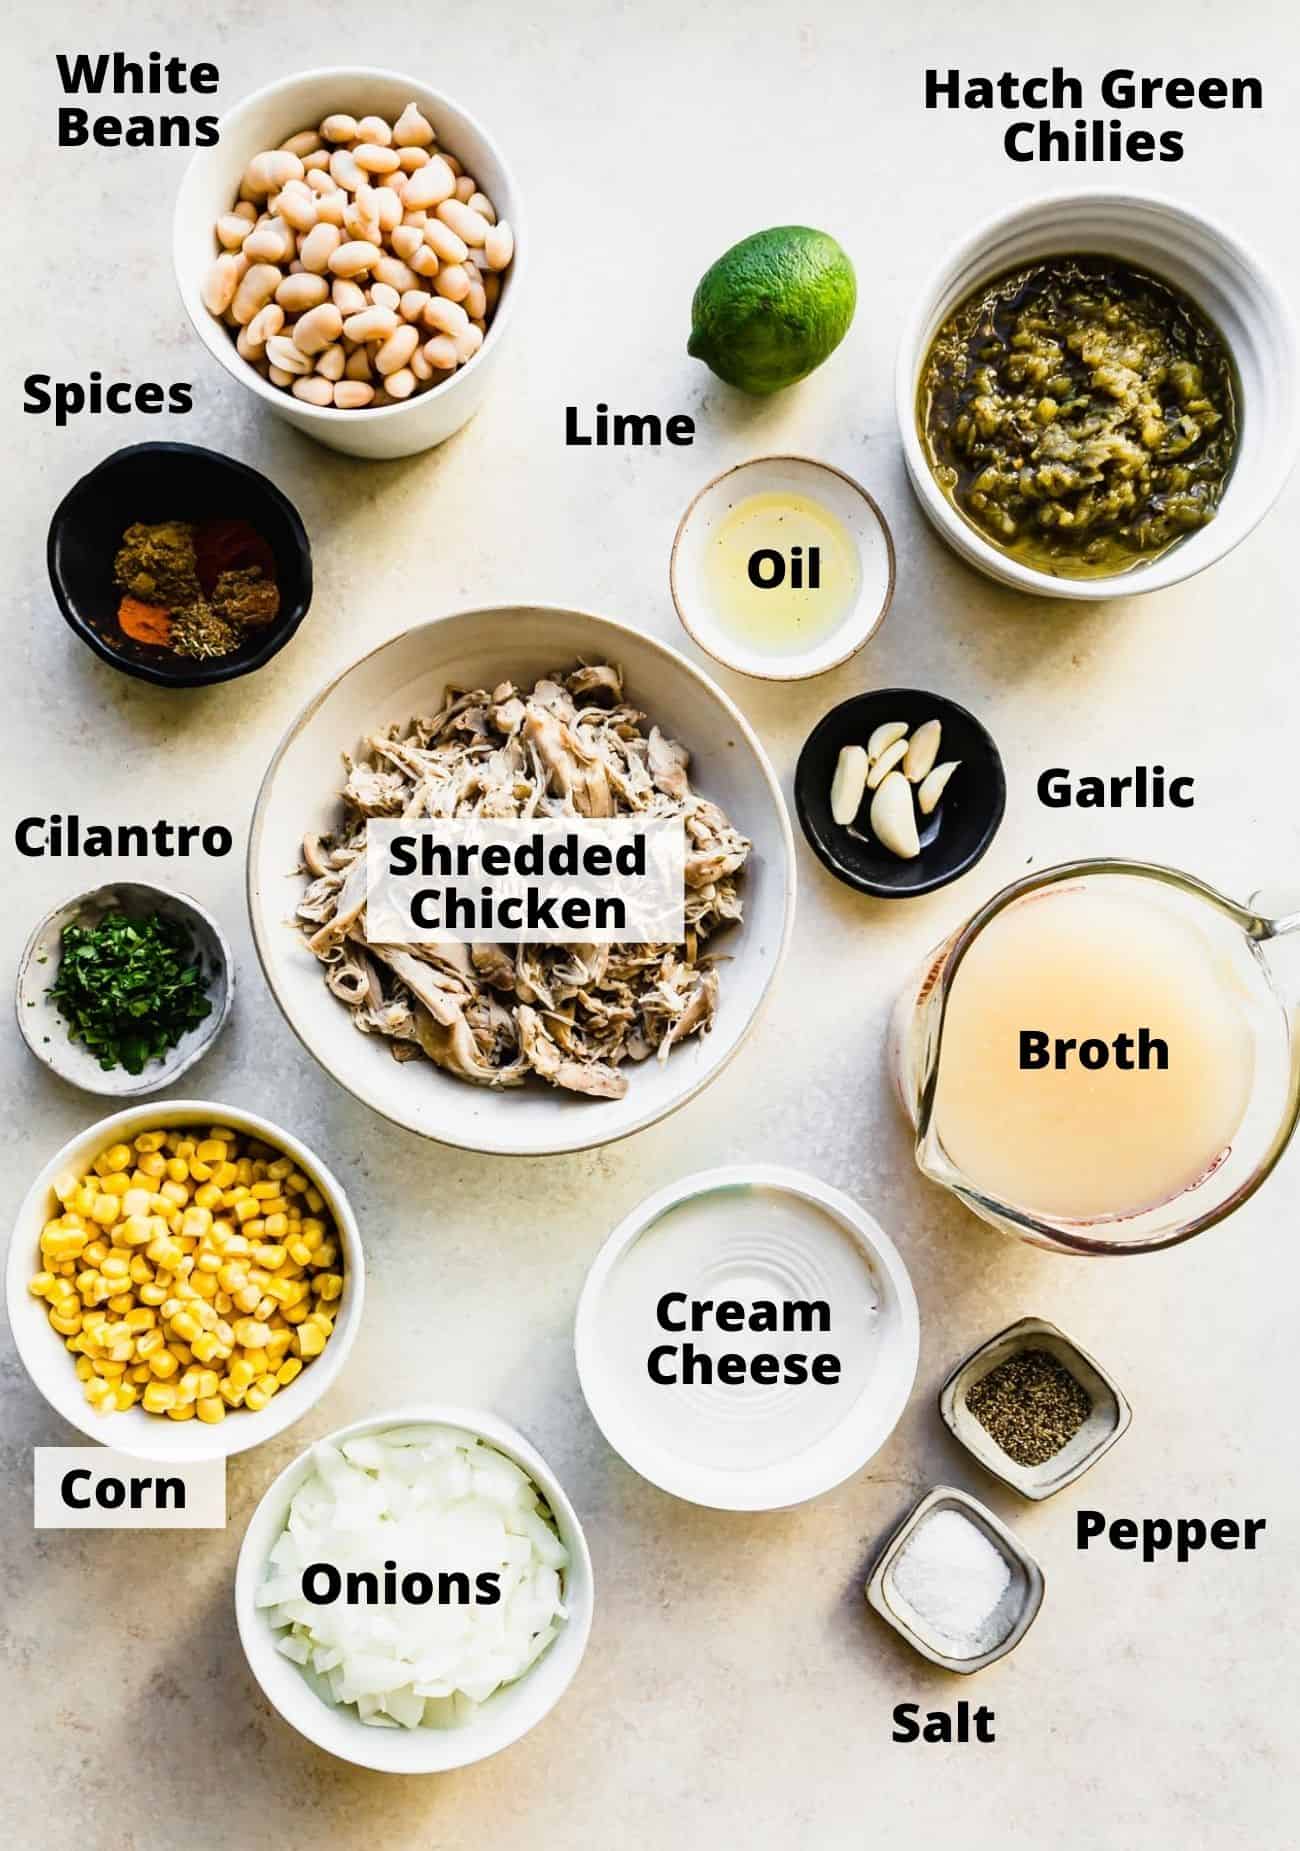 ingredients laid out to make instant pot white chicken chili: white beans, hatch greens chilies, spices, lime, oil, garlic, broth, shredded chicken, cilantro, corn, onions, cream cheese, pepper, salt